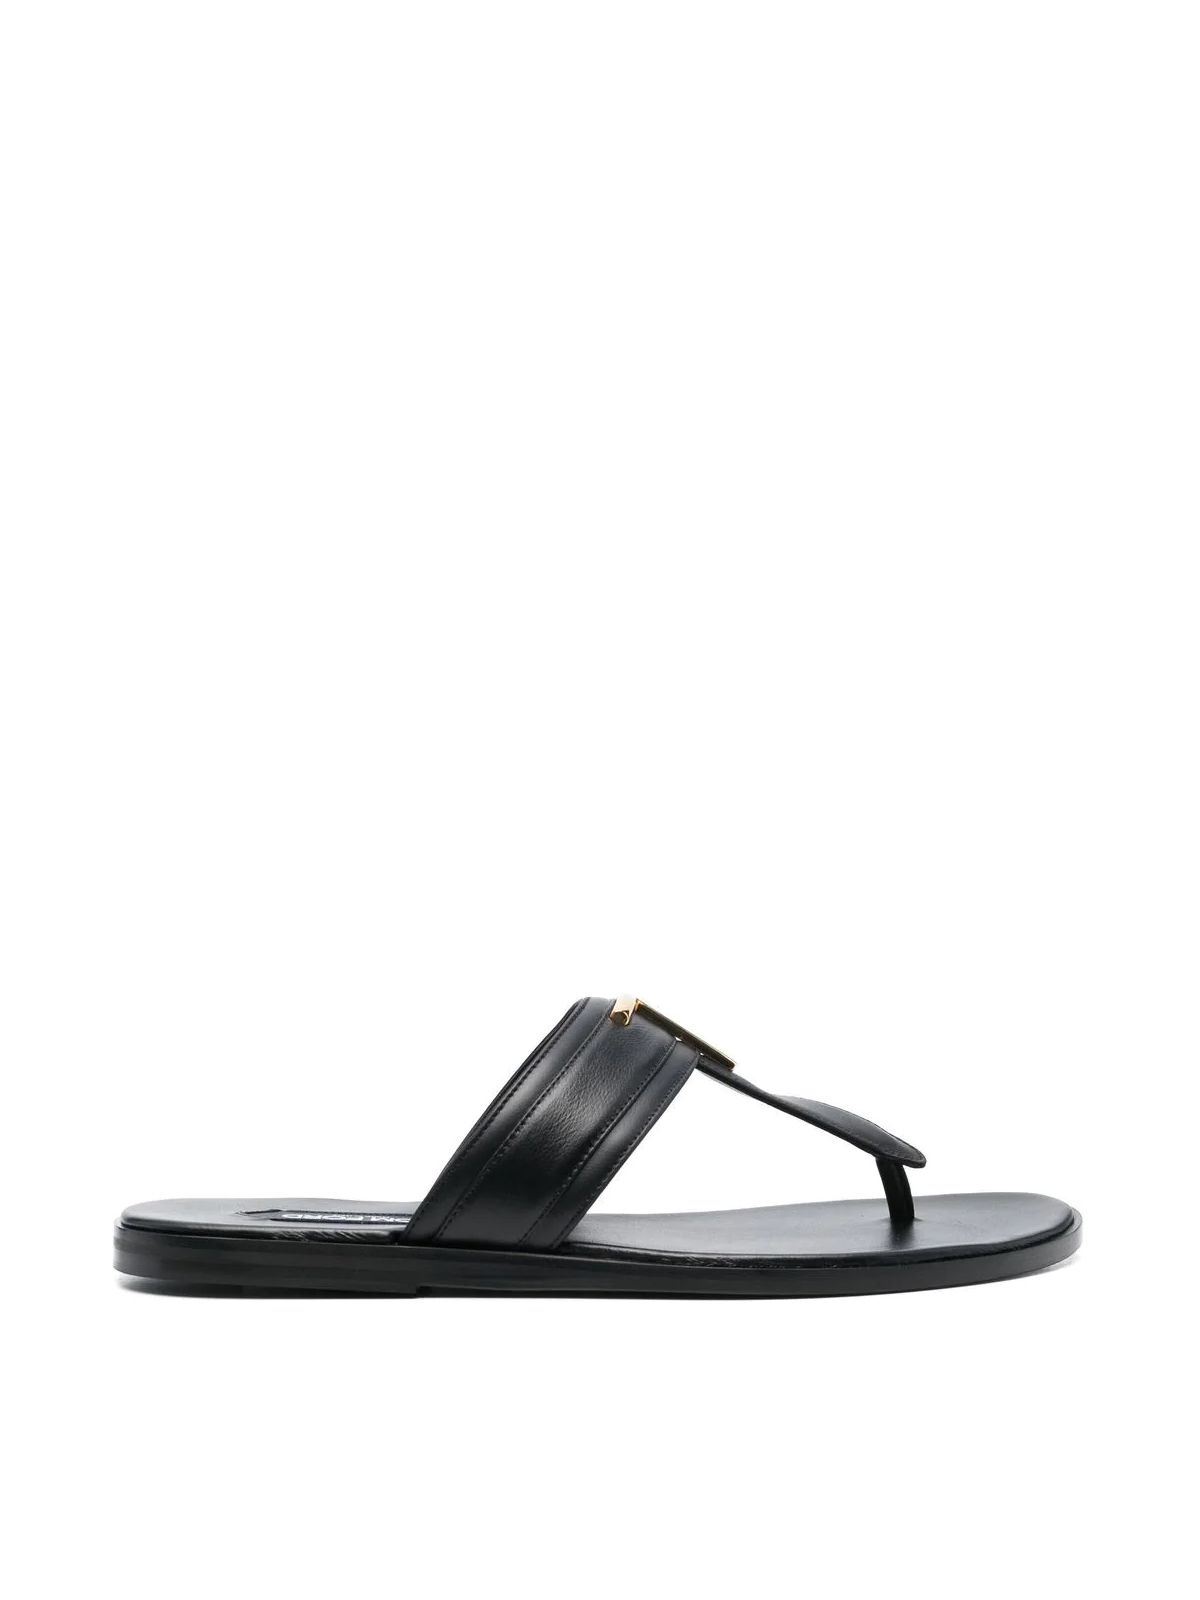 Tom Ford Smooth Leather Sandals In Black